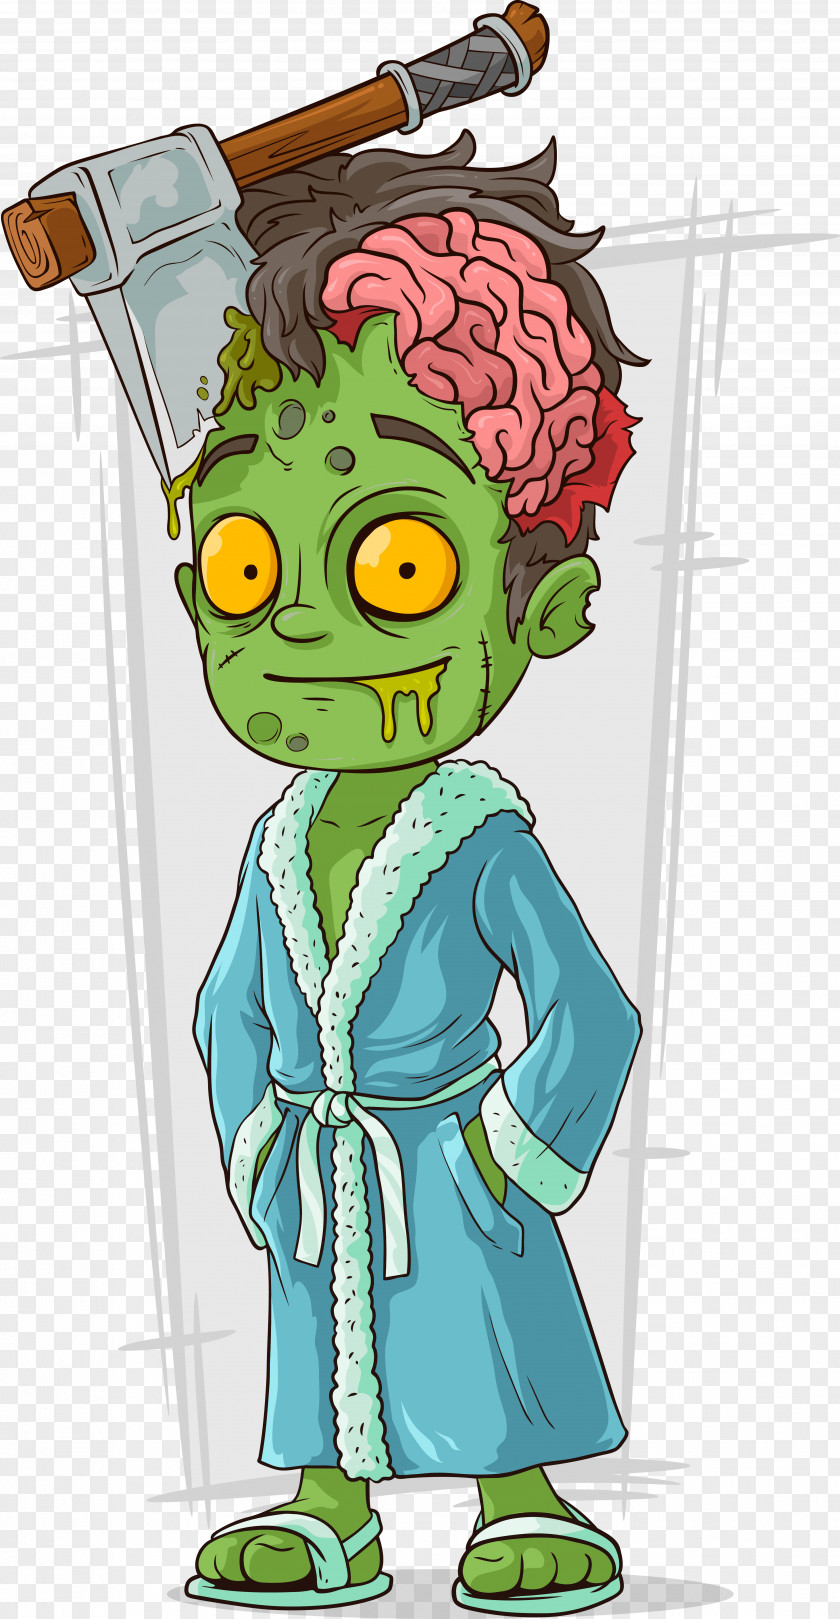 Cartoon Zombie Illustration PNG Illustration, It has been split ax cartoon characters material clipart PNG